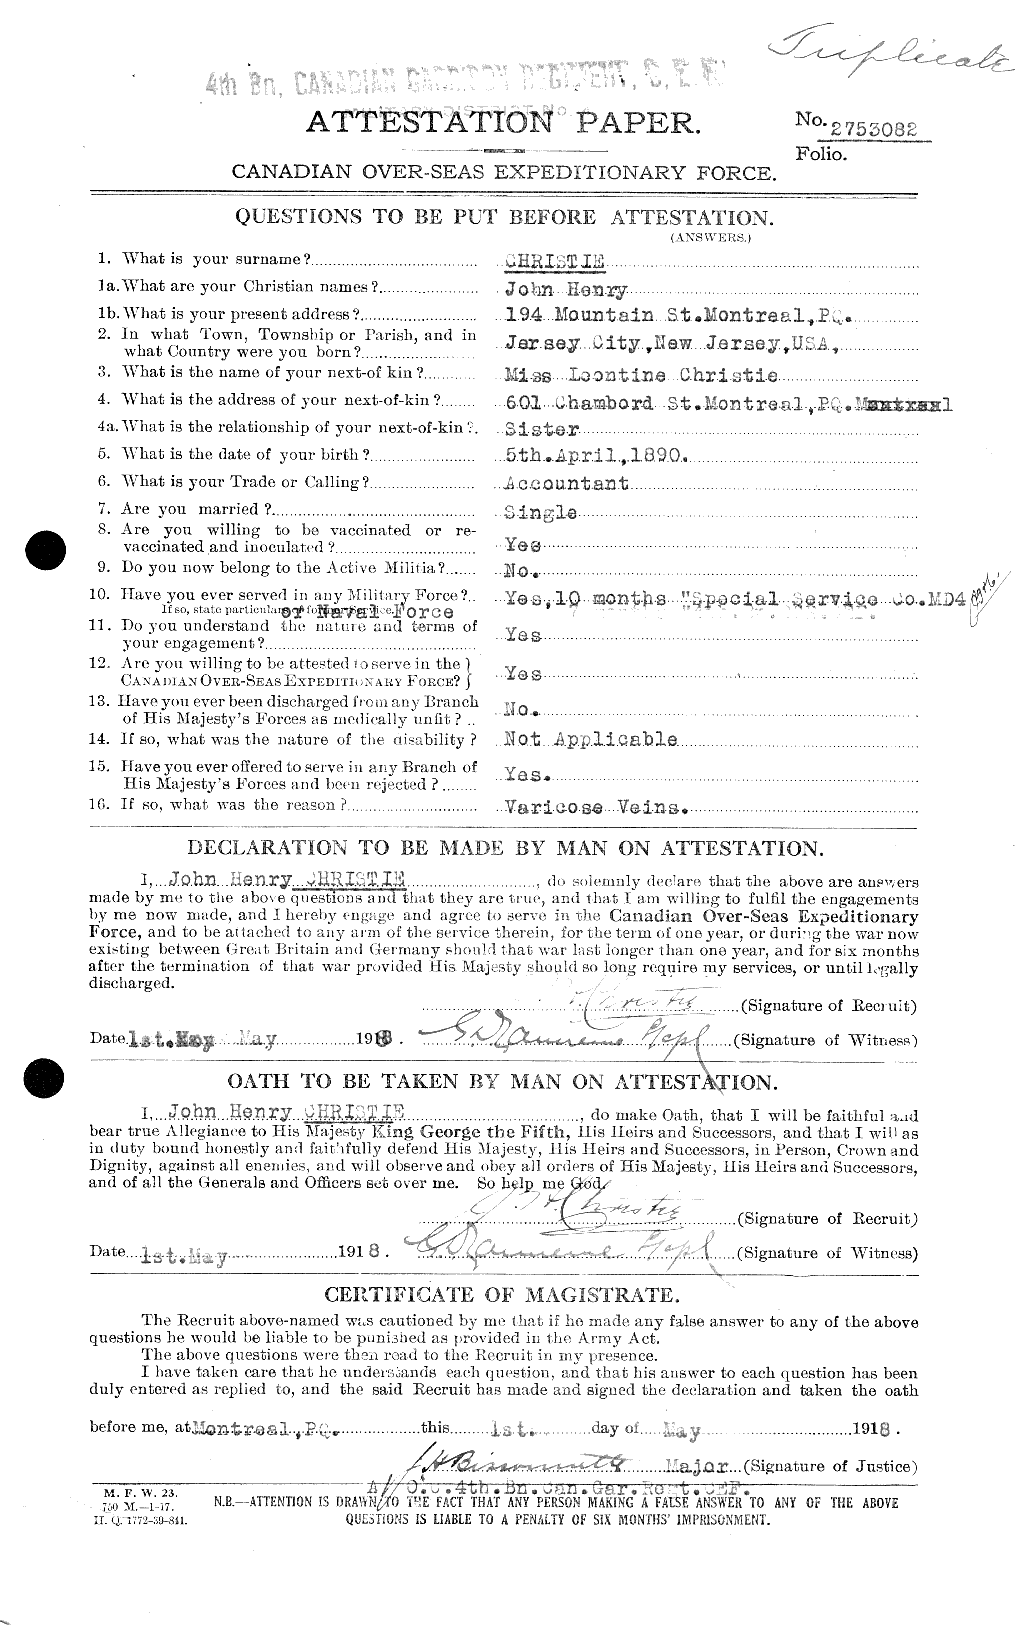 Personnel Records of the First World War - CEF 022005c